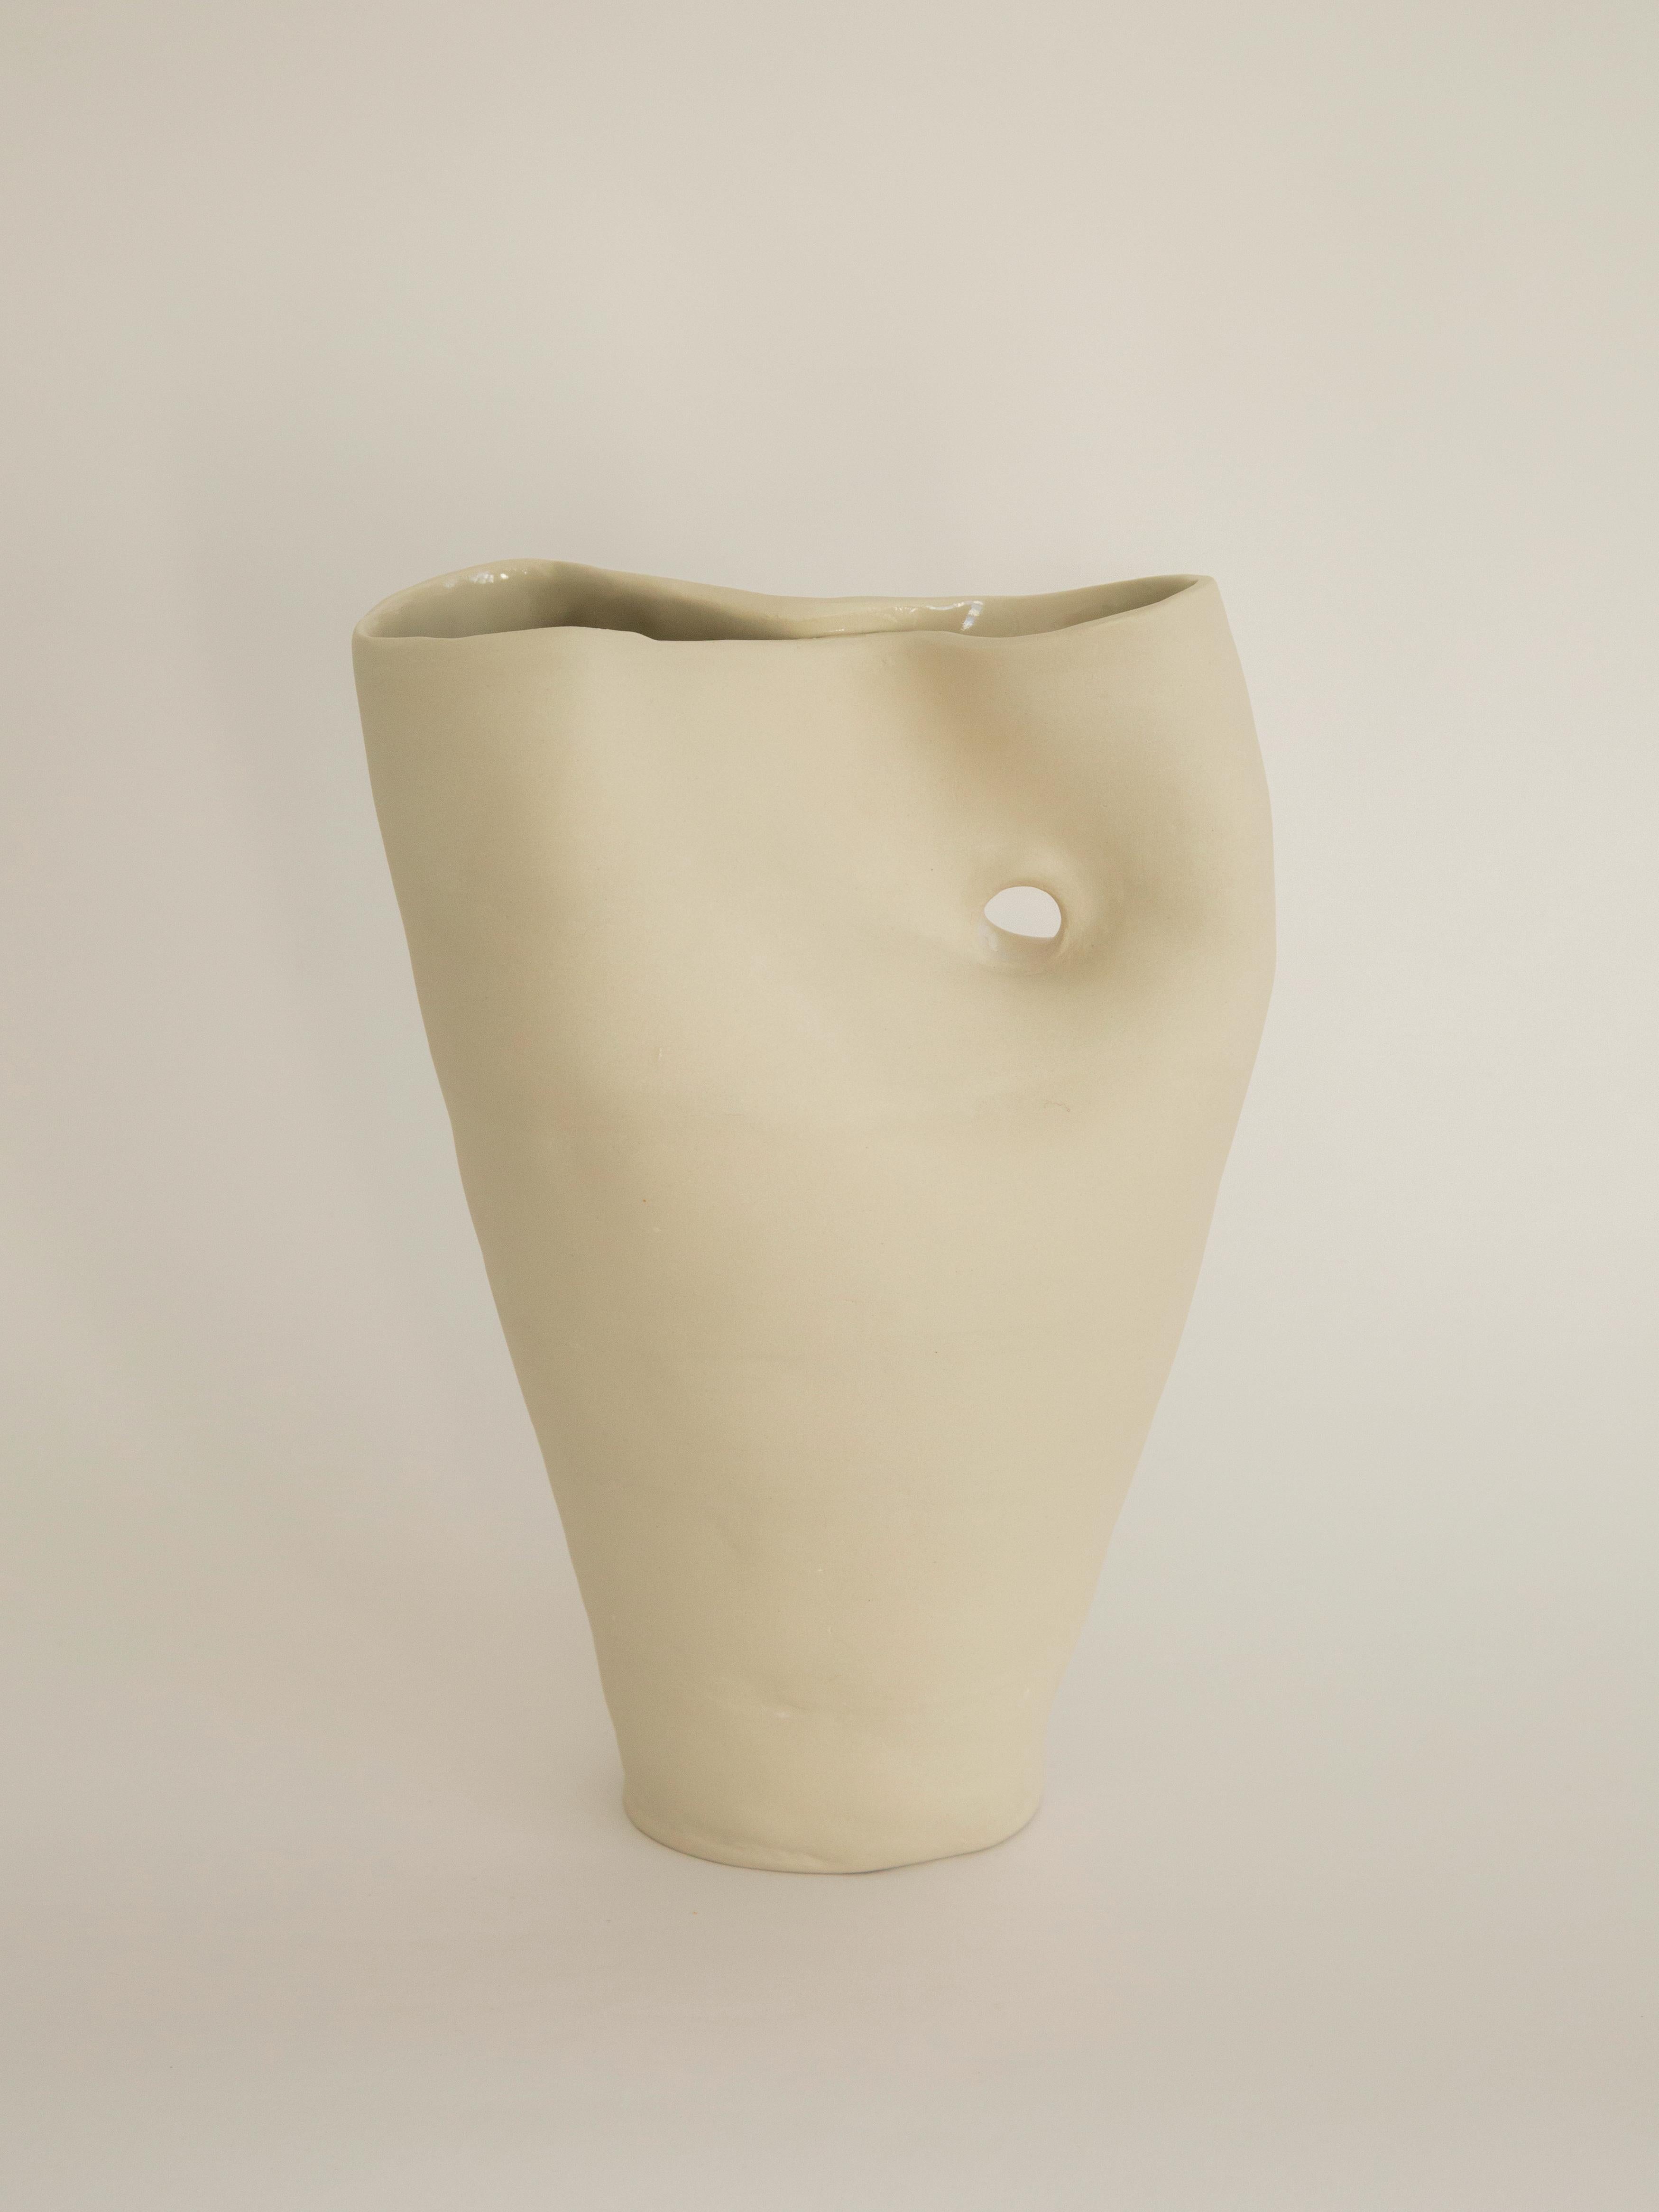 Hole Vase by Solem Ceramics
Dimensions: D 7.5 x W 20.5 x H 33 cm.
Materials: White stoneware, glaze.
This vase is water safe. Please contact us.

Solem’s work pulls from memories of the architecture and community within SWANA and Southeast Asia